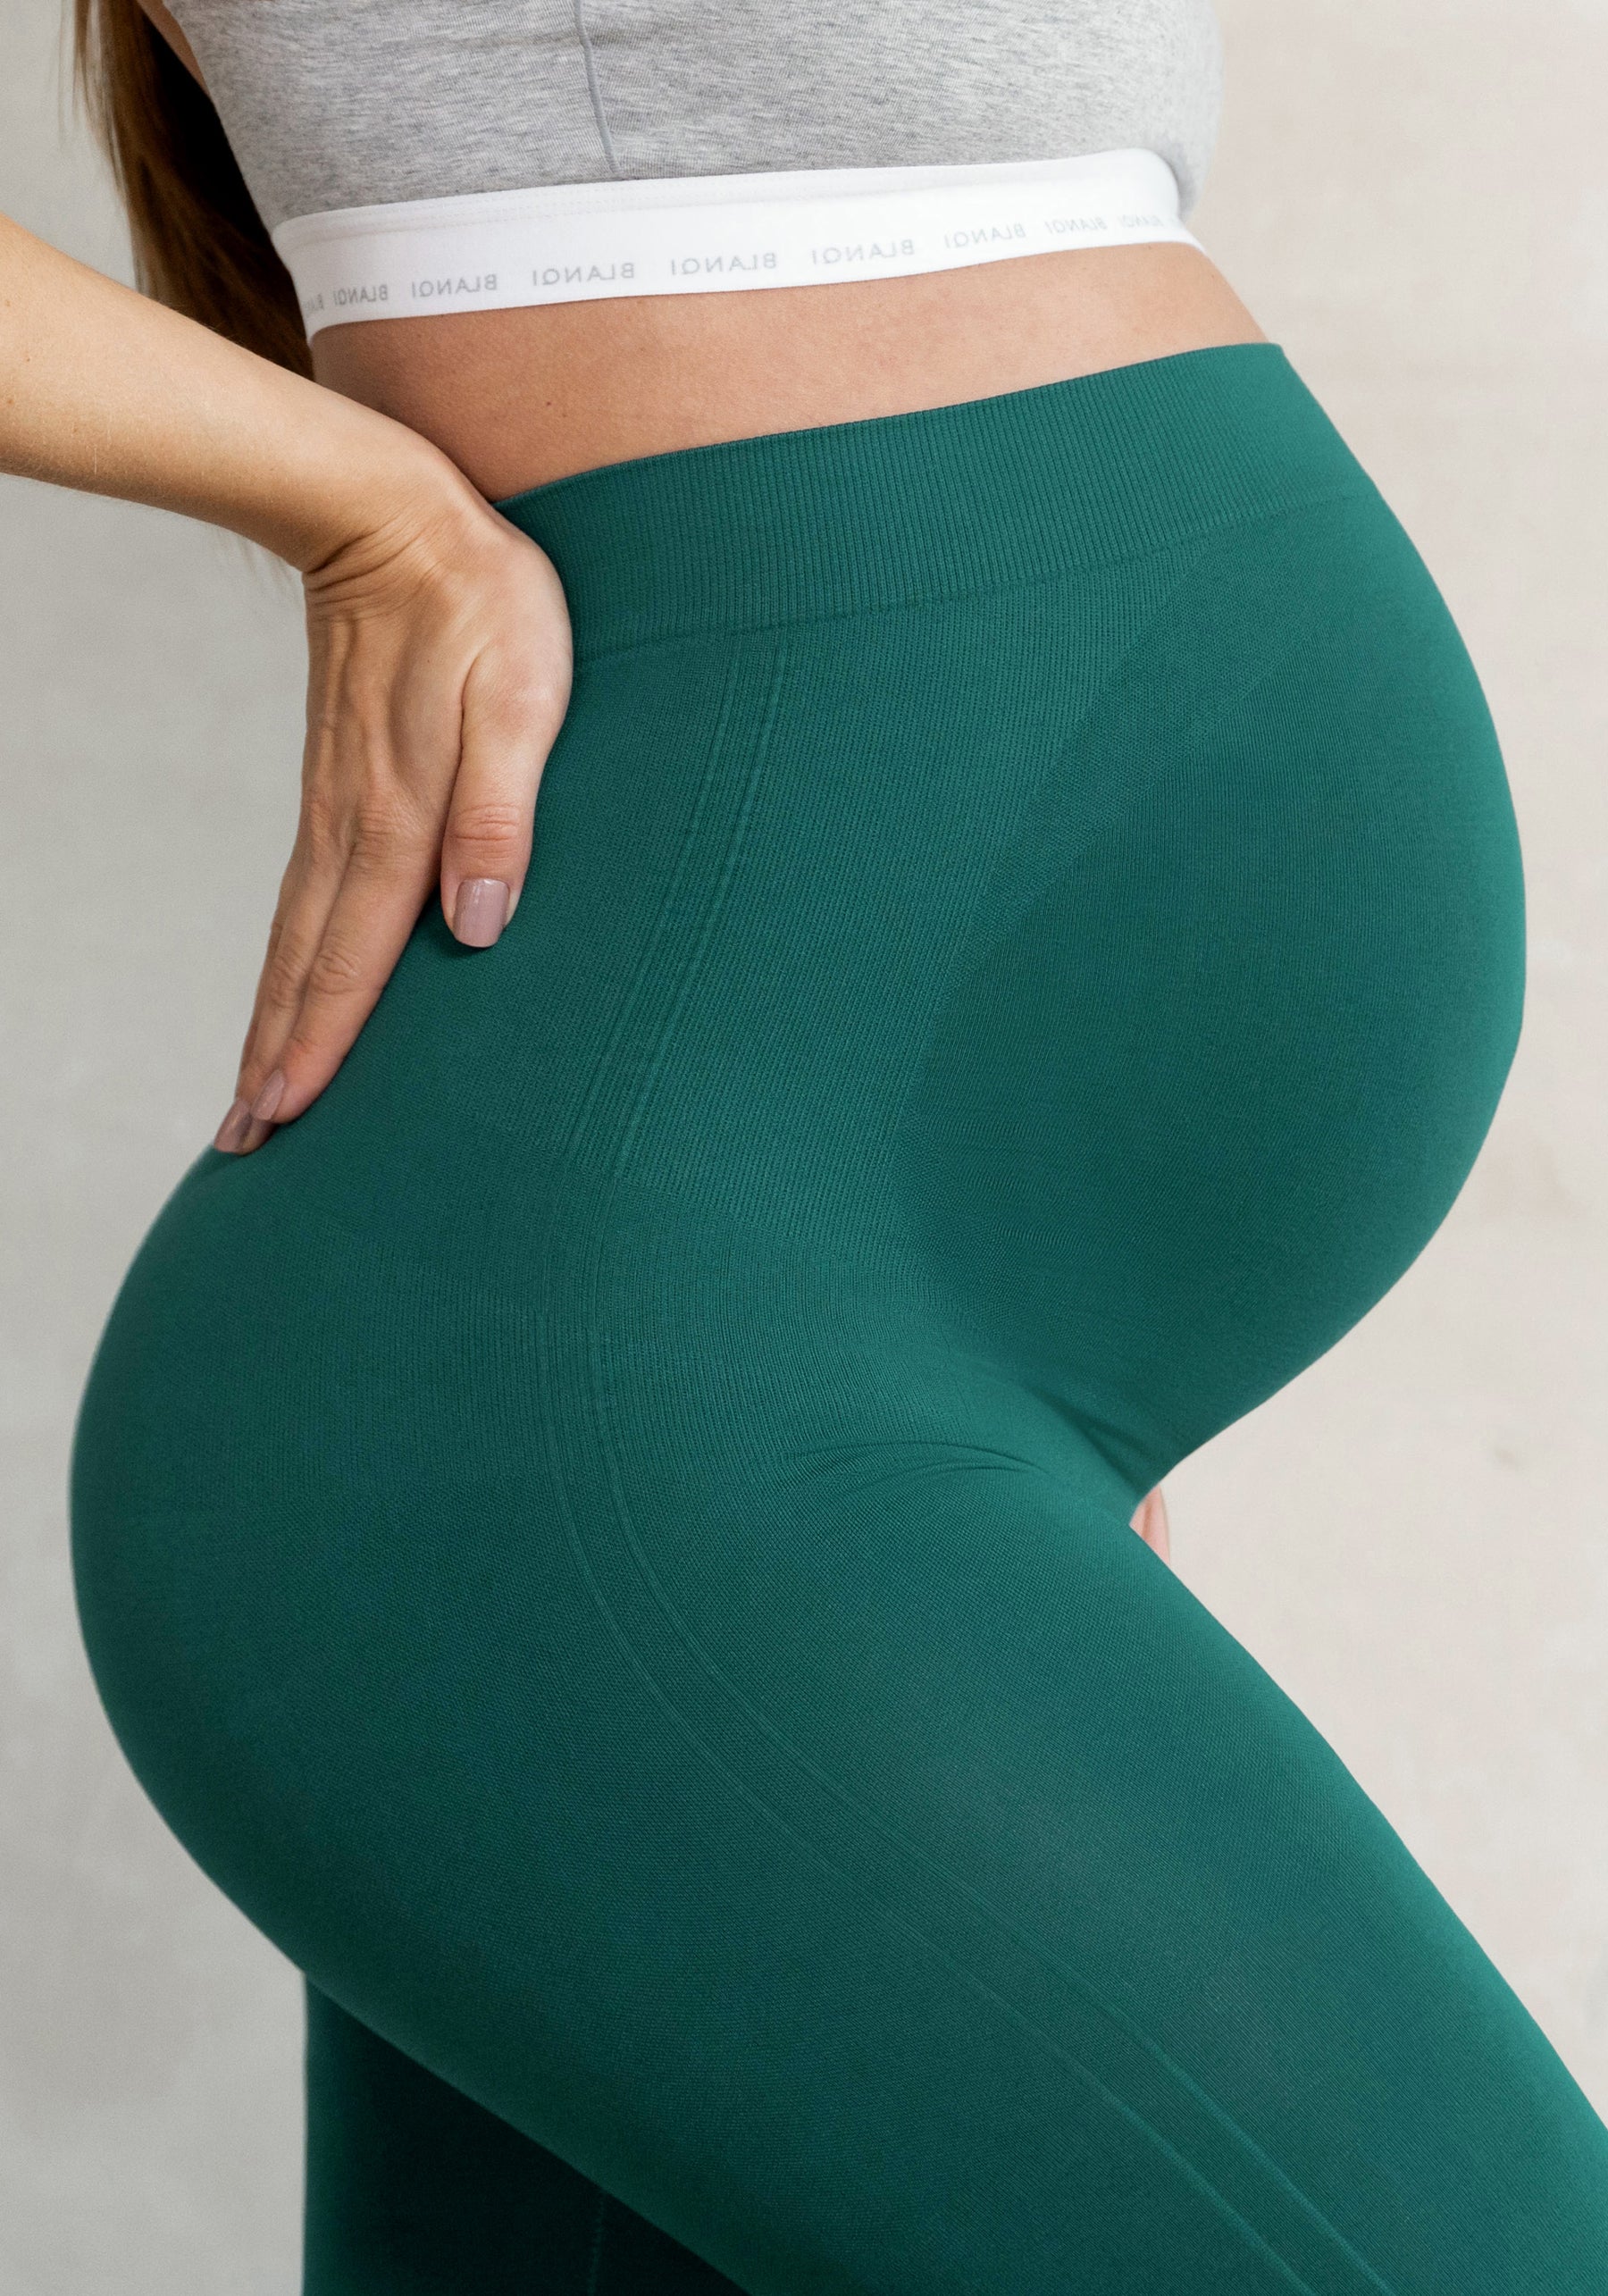 My Favorite Maternity Leggings (and joggers) - Blue Mountain Belle